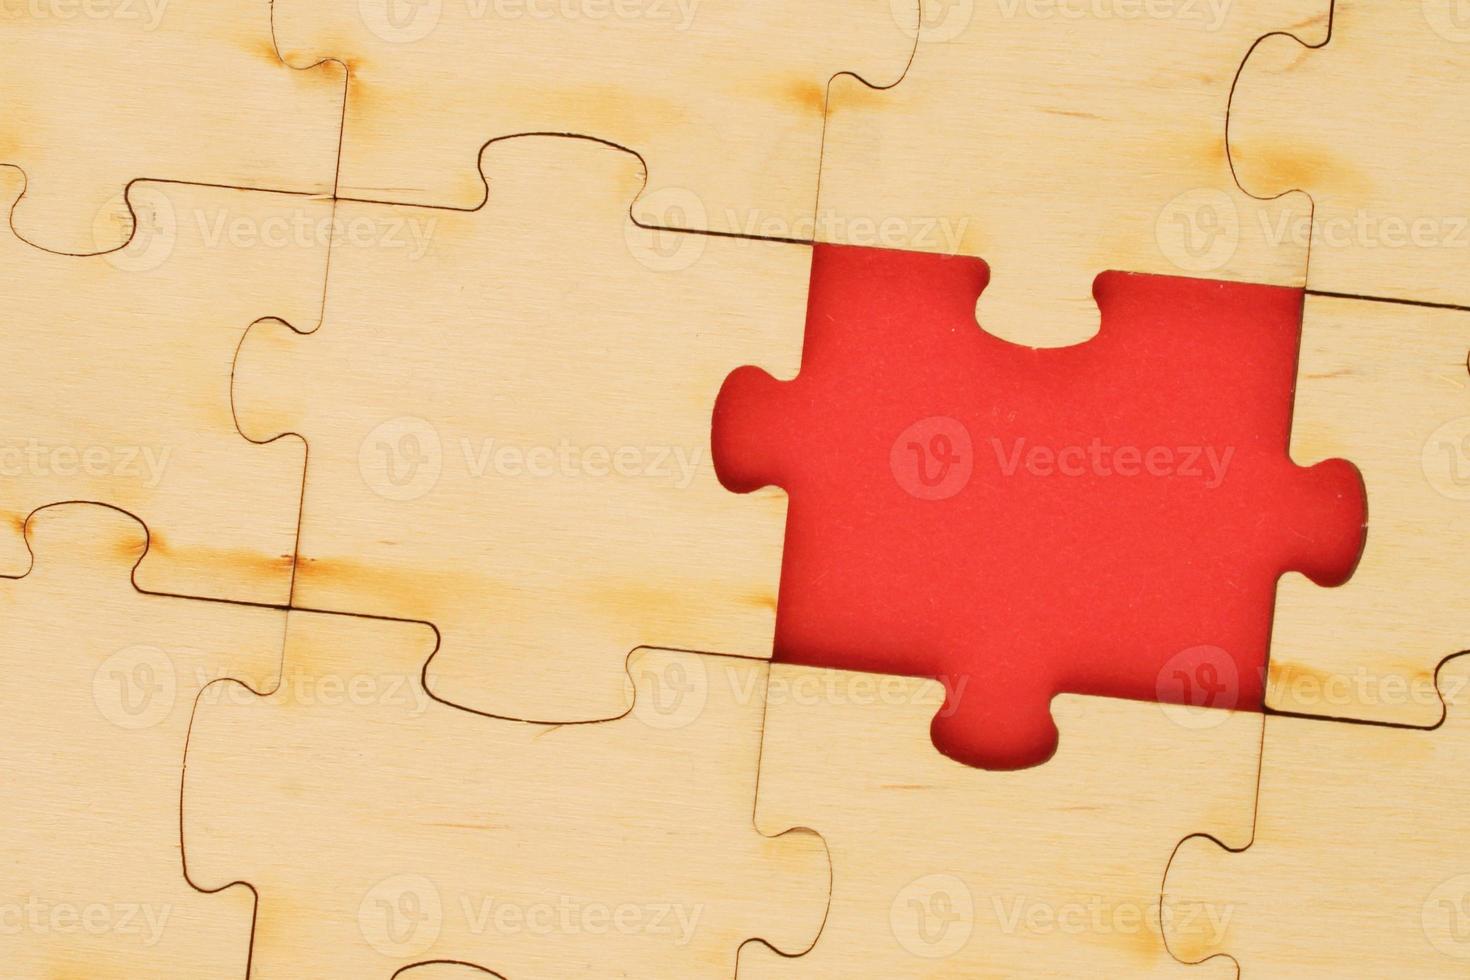 Incomplete and absence wooden puzzle piece with red backdrop. Missing piece. Mental health concept. Symbol of problem solving. Business creative solution. Communication idea. Hobby, play, fun game photo